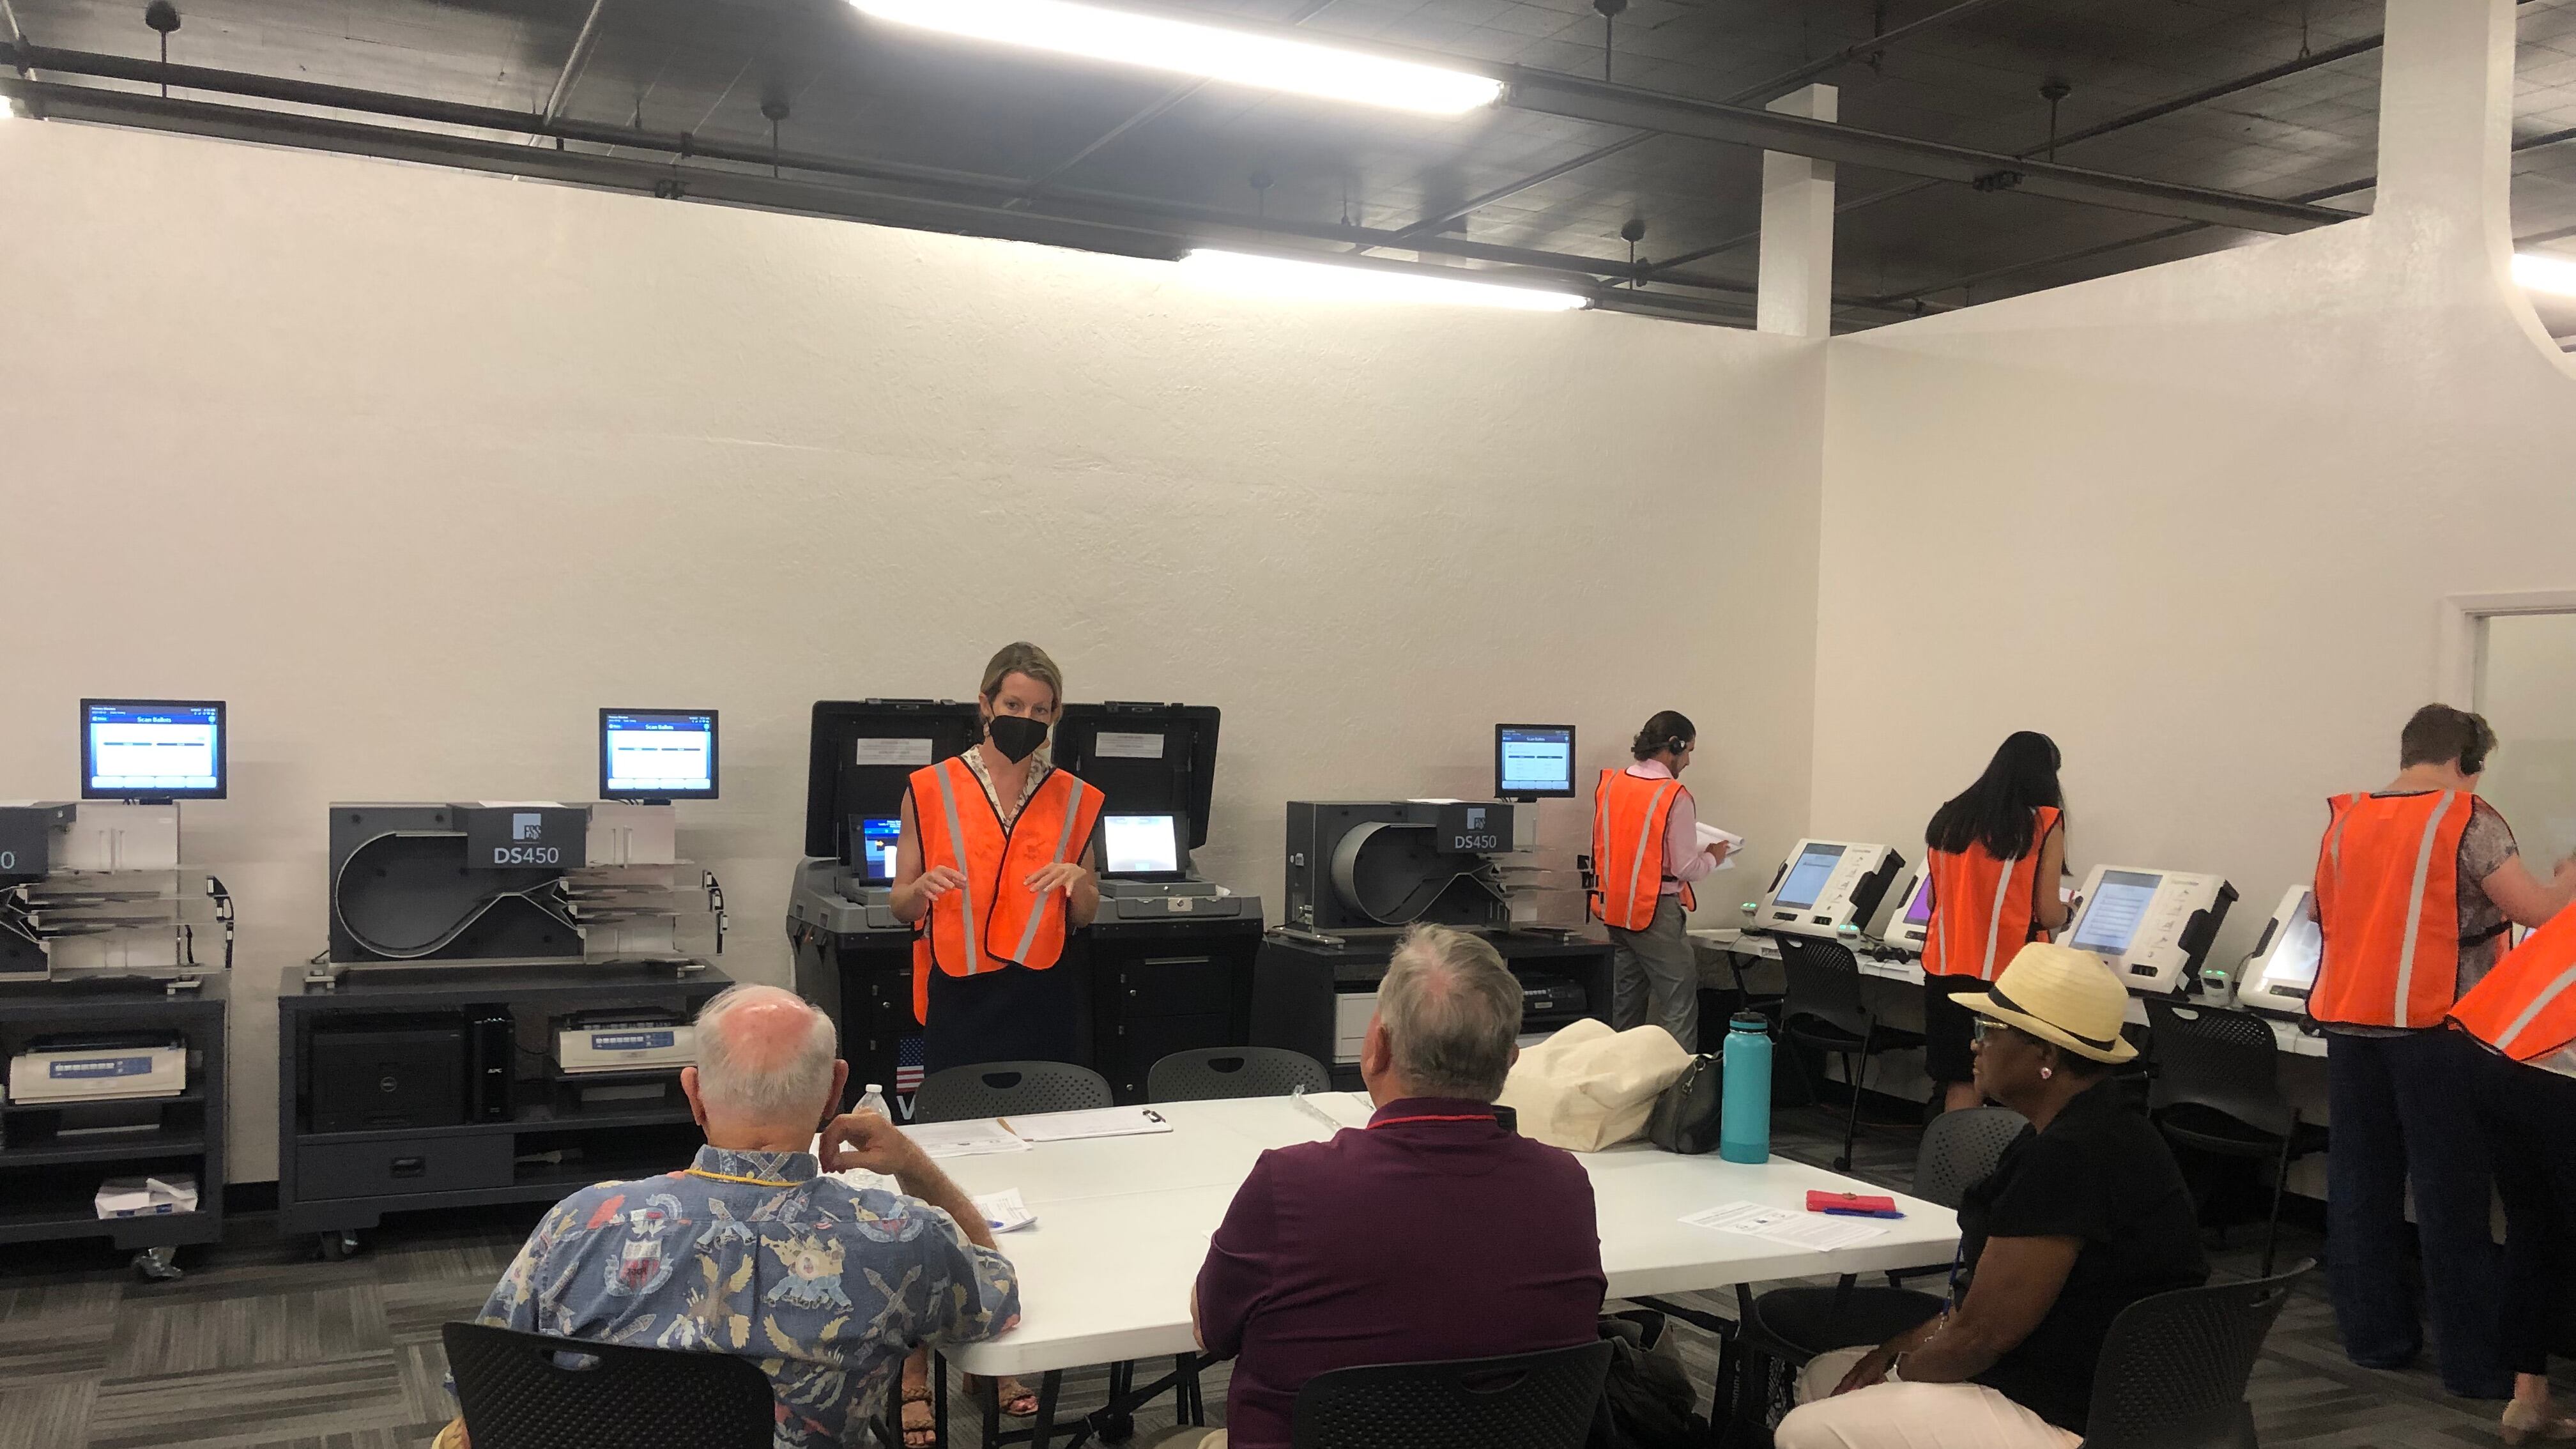 A woman in an orange vest gestures before computerized machines while three seated observers watch.